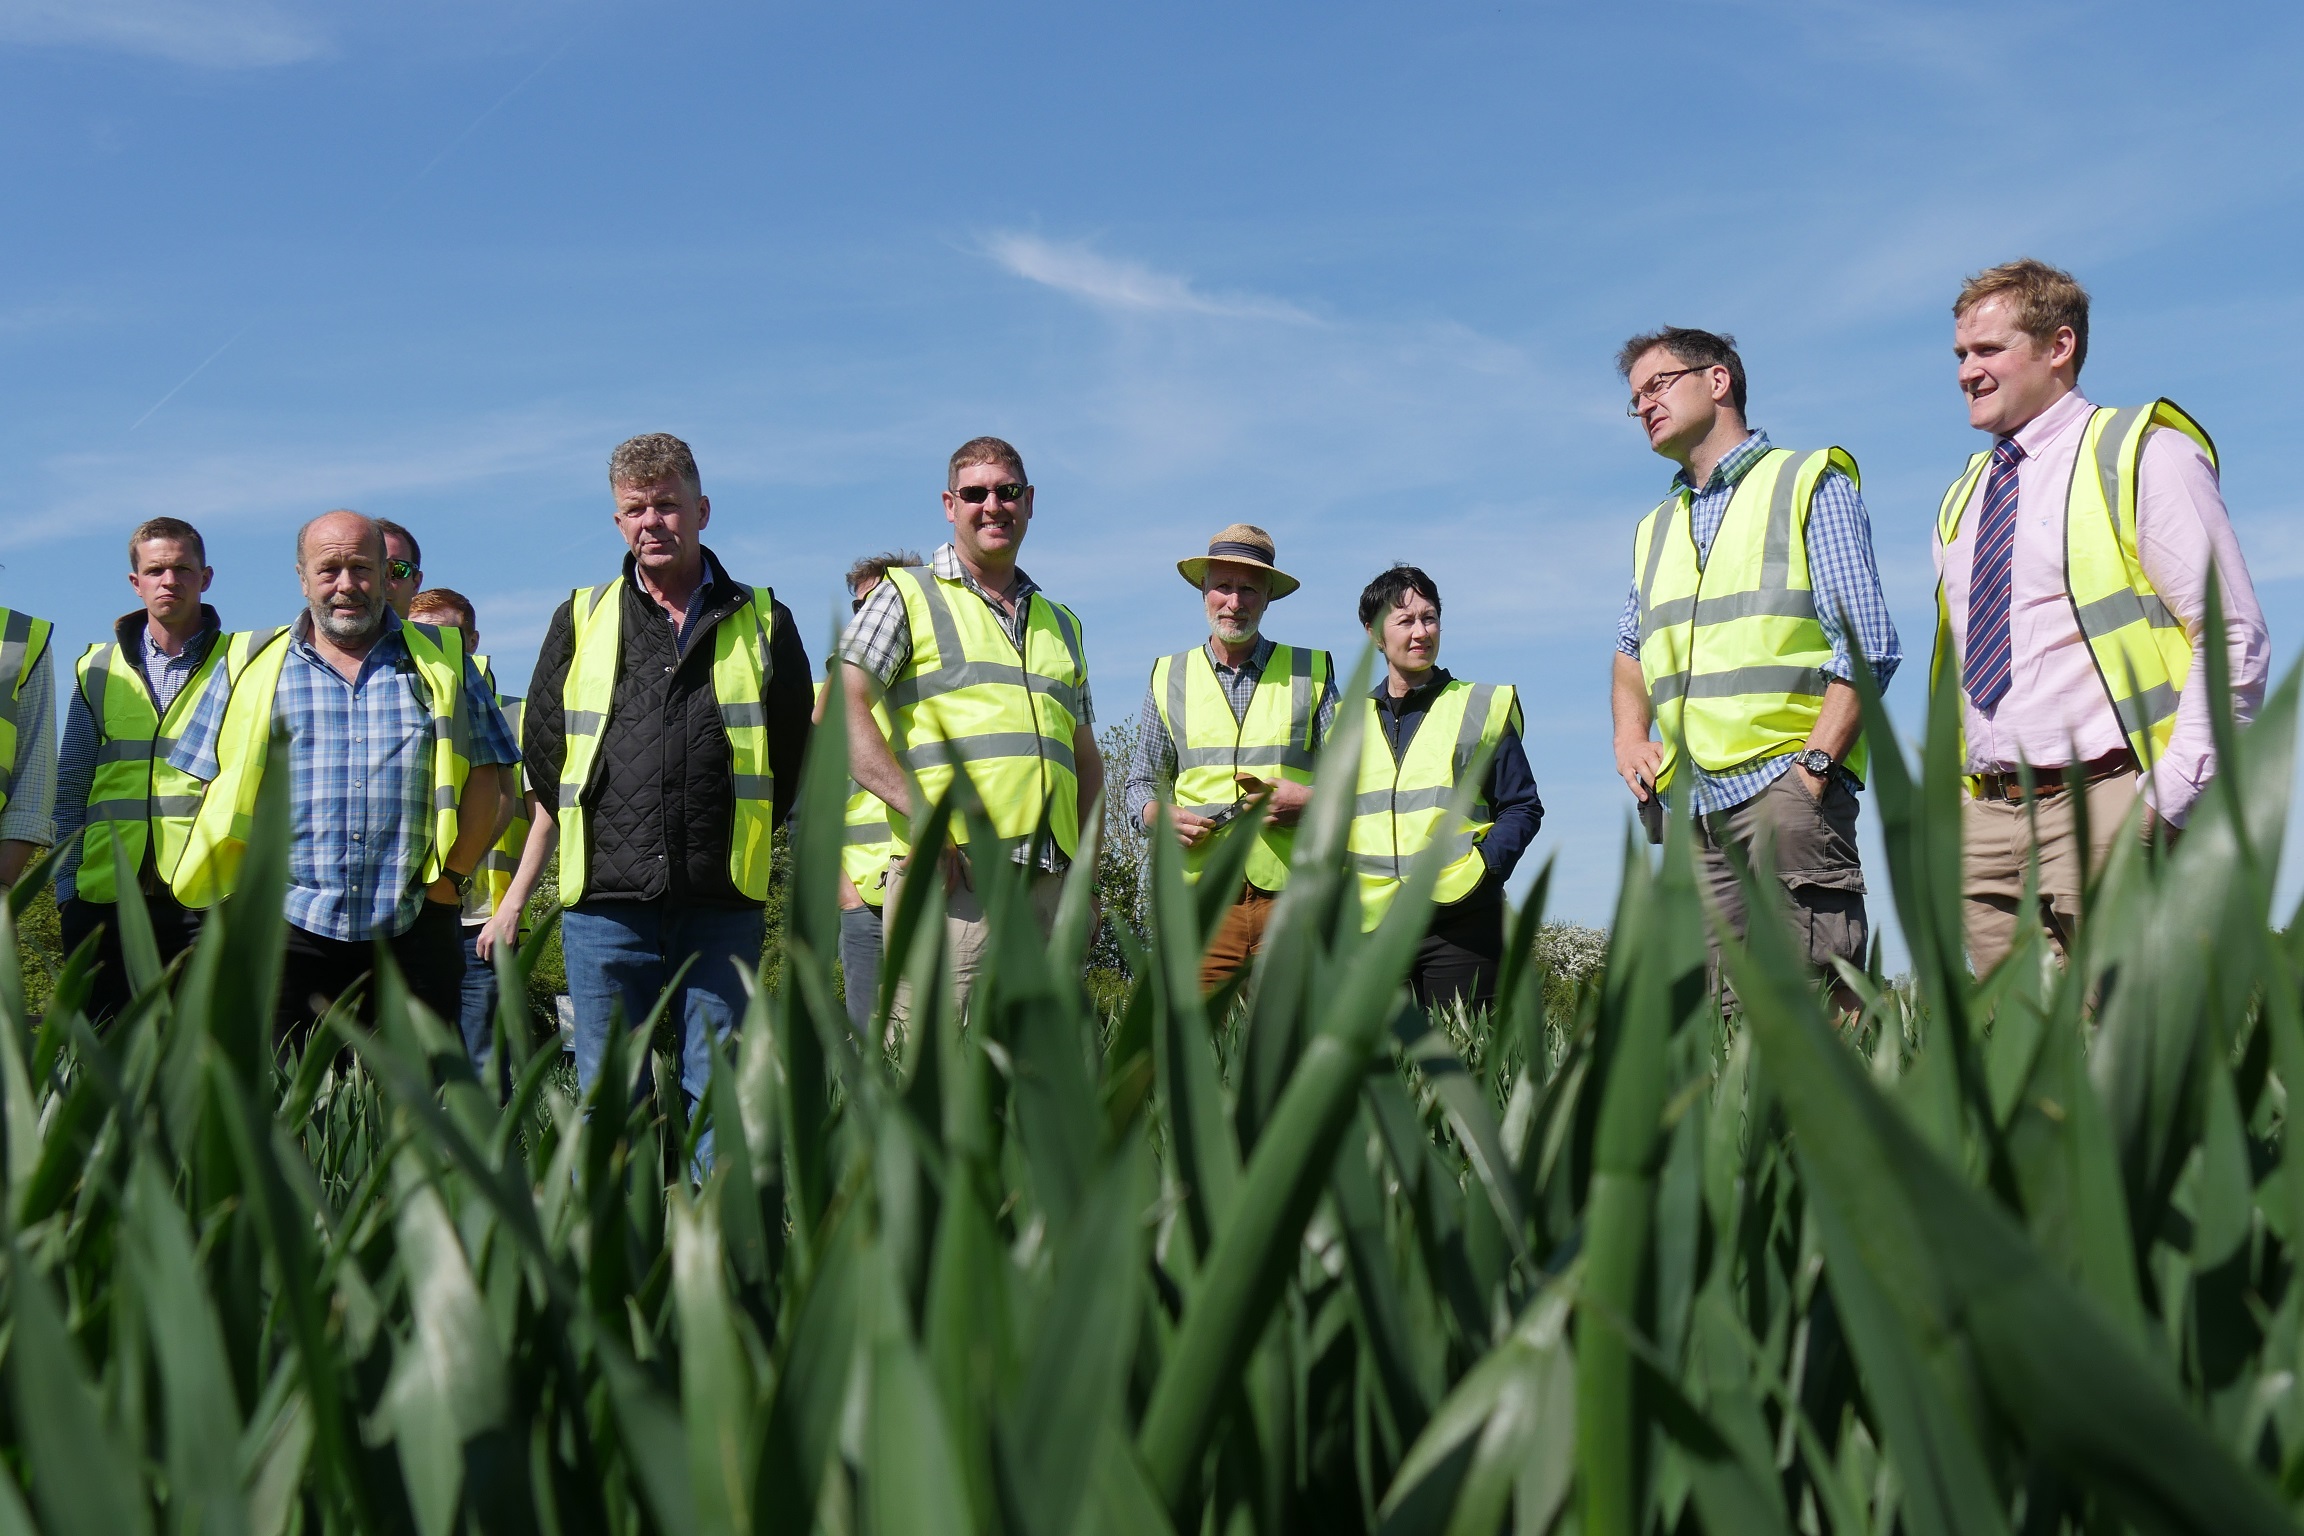 Monitor Farm group looks at a field of wheat